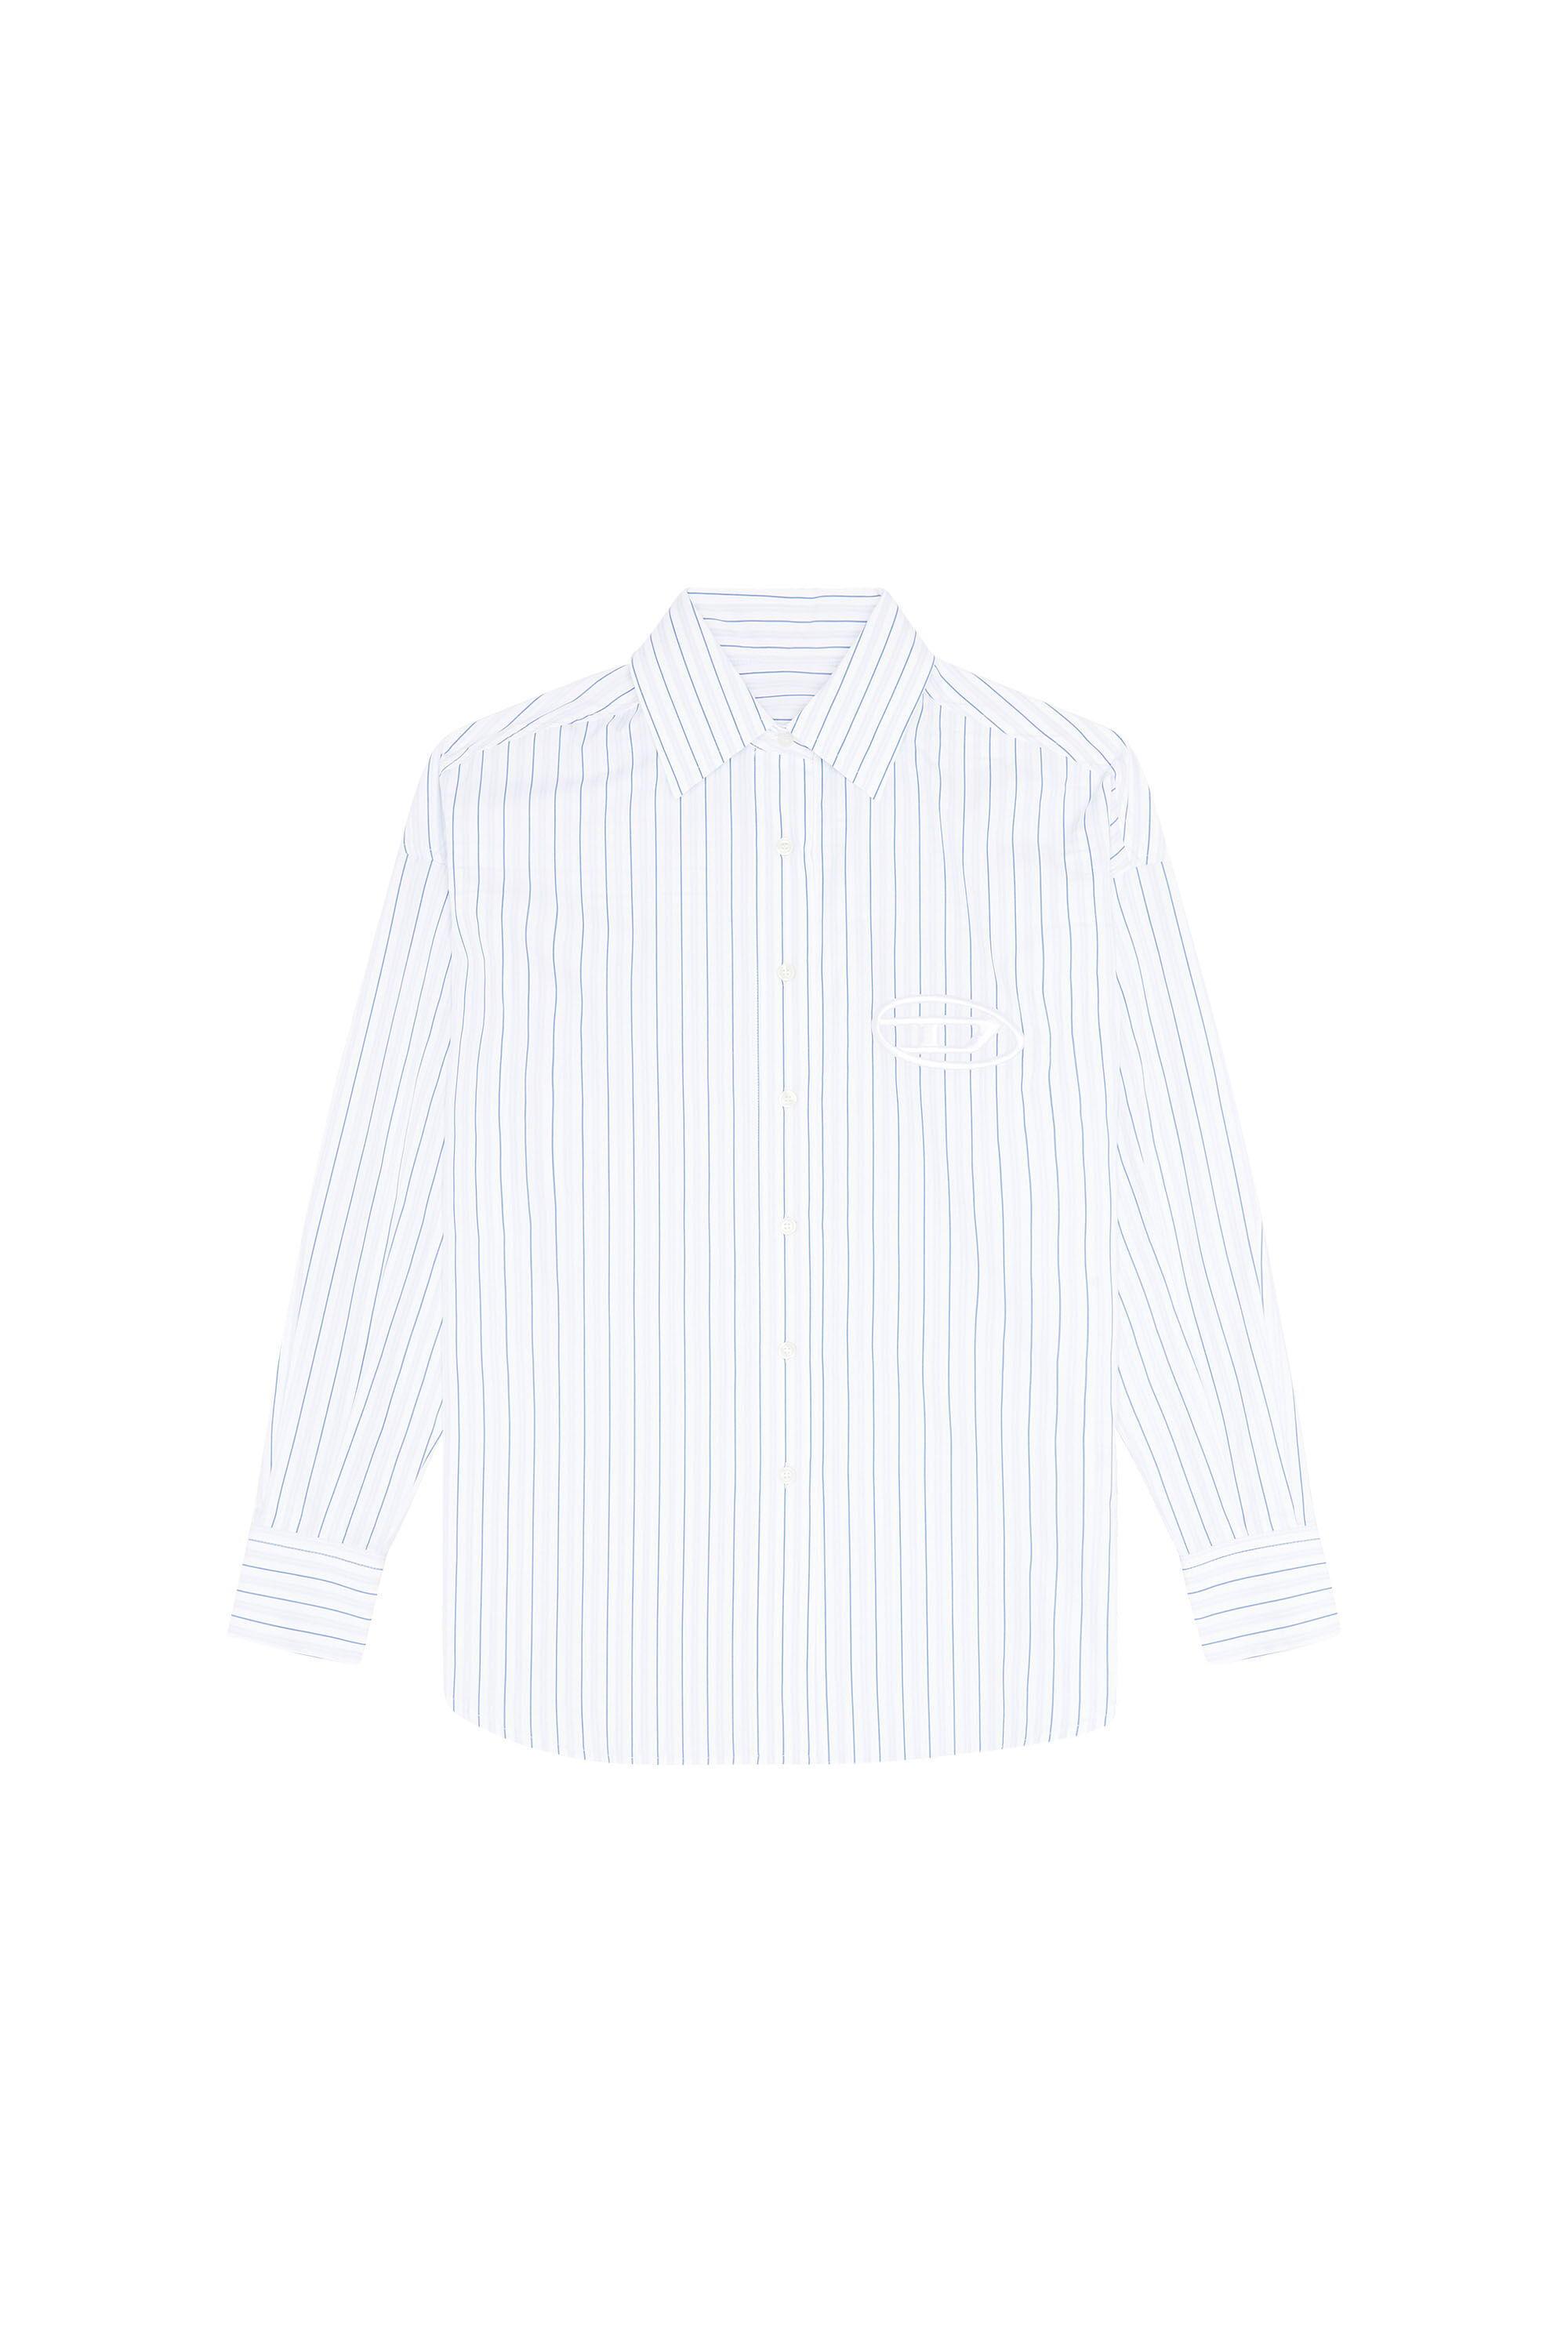 S-DOUBLY-STRIPE Man: Fine cotton shirt with striped pattern | Diesel